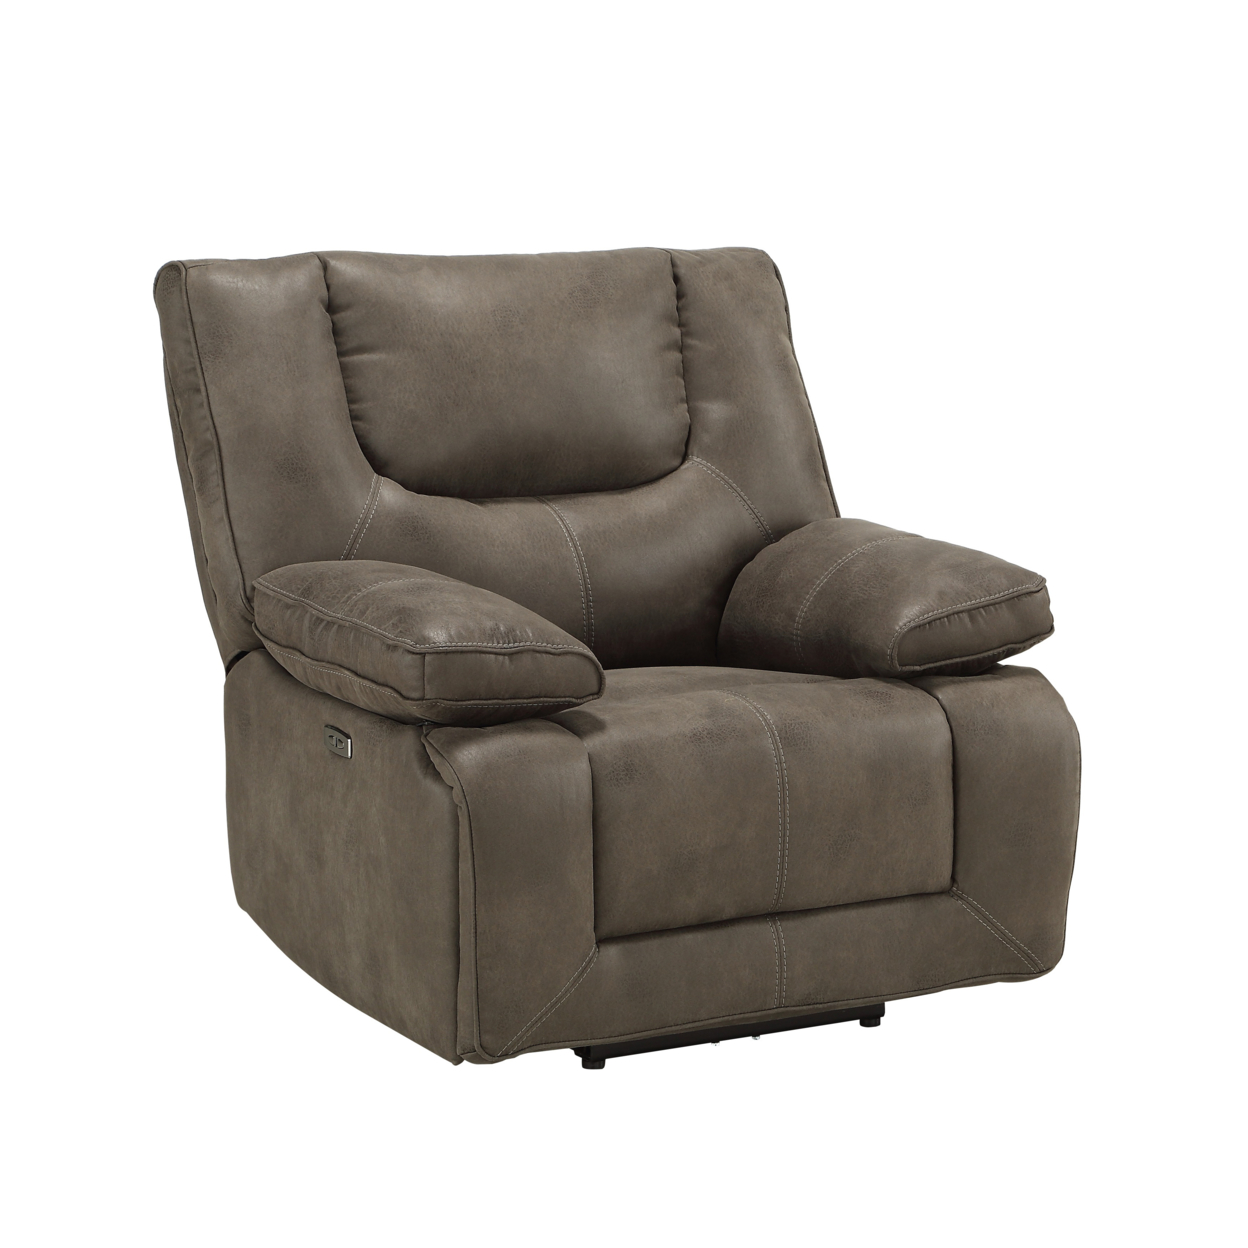 Leatherette Power Motion Recliner With Pillow To Armrests, Brown- Saltoro Sherpi